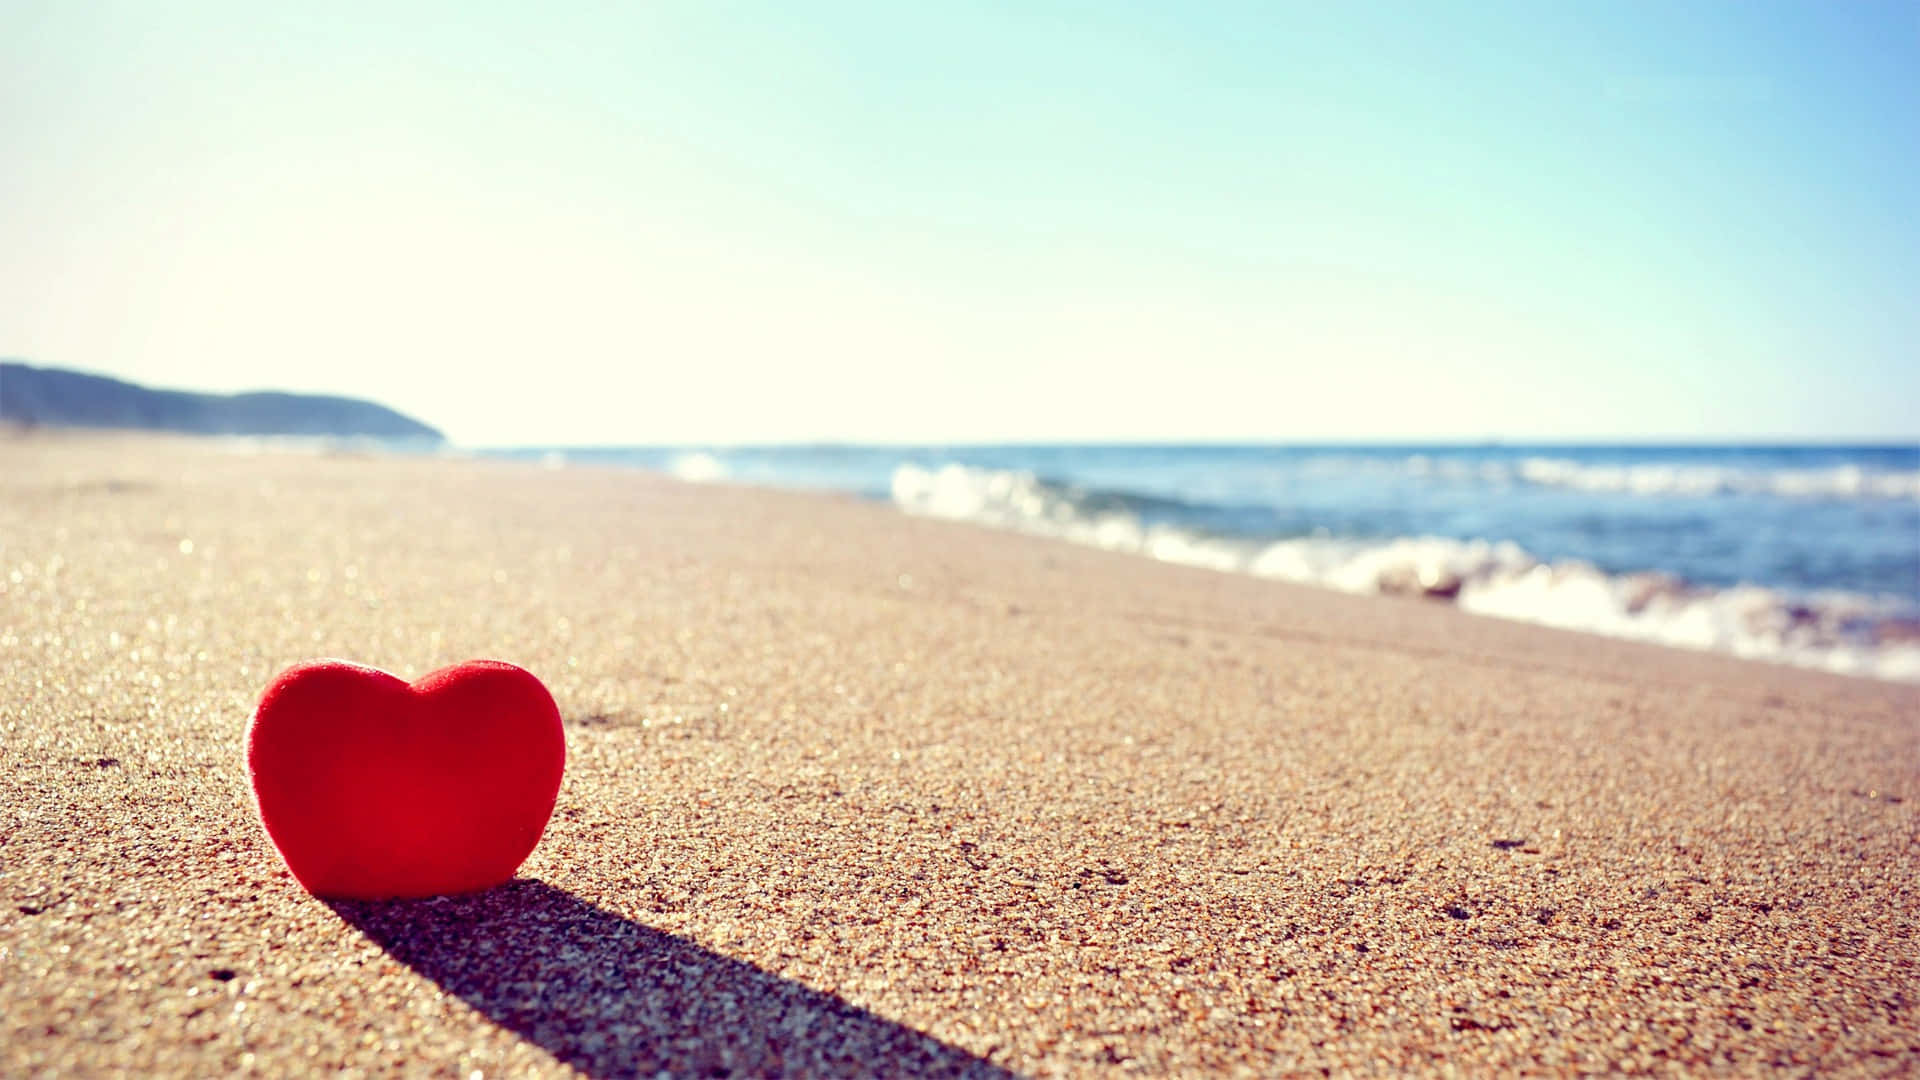 Astounding Red Heart In Sand Love Background